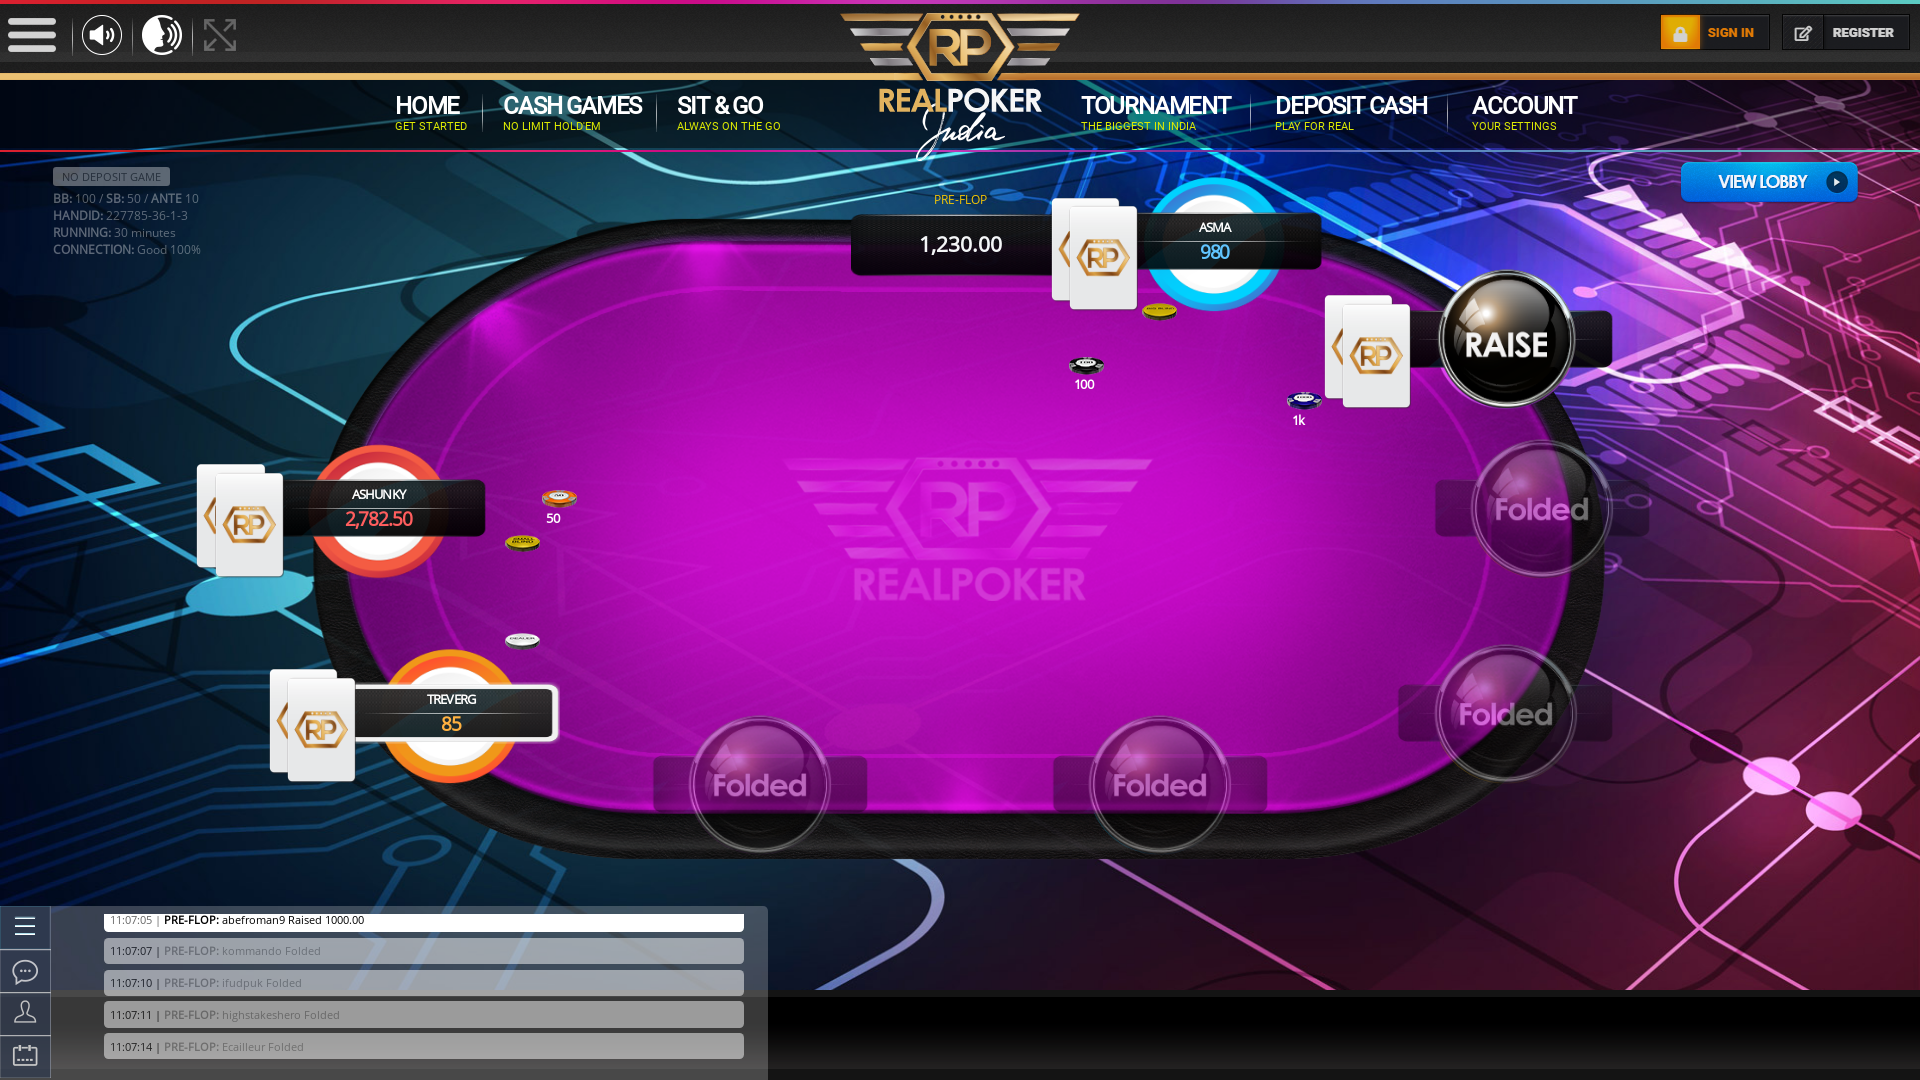 Indian online poker on a 10 player table in the 30th minute match up